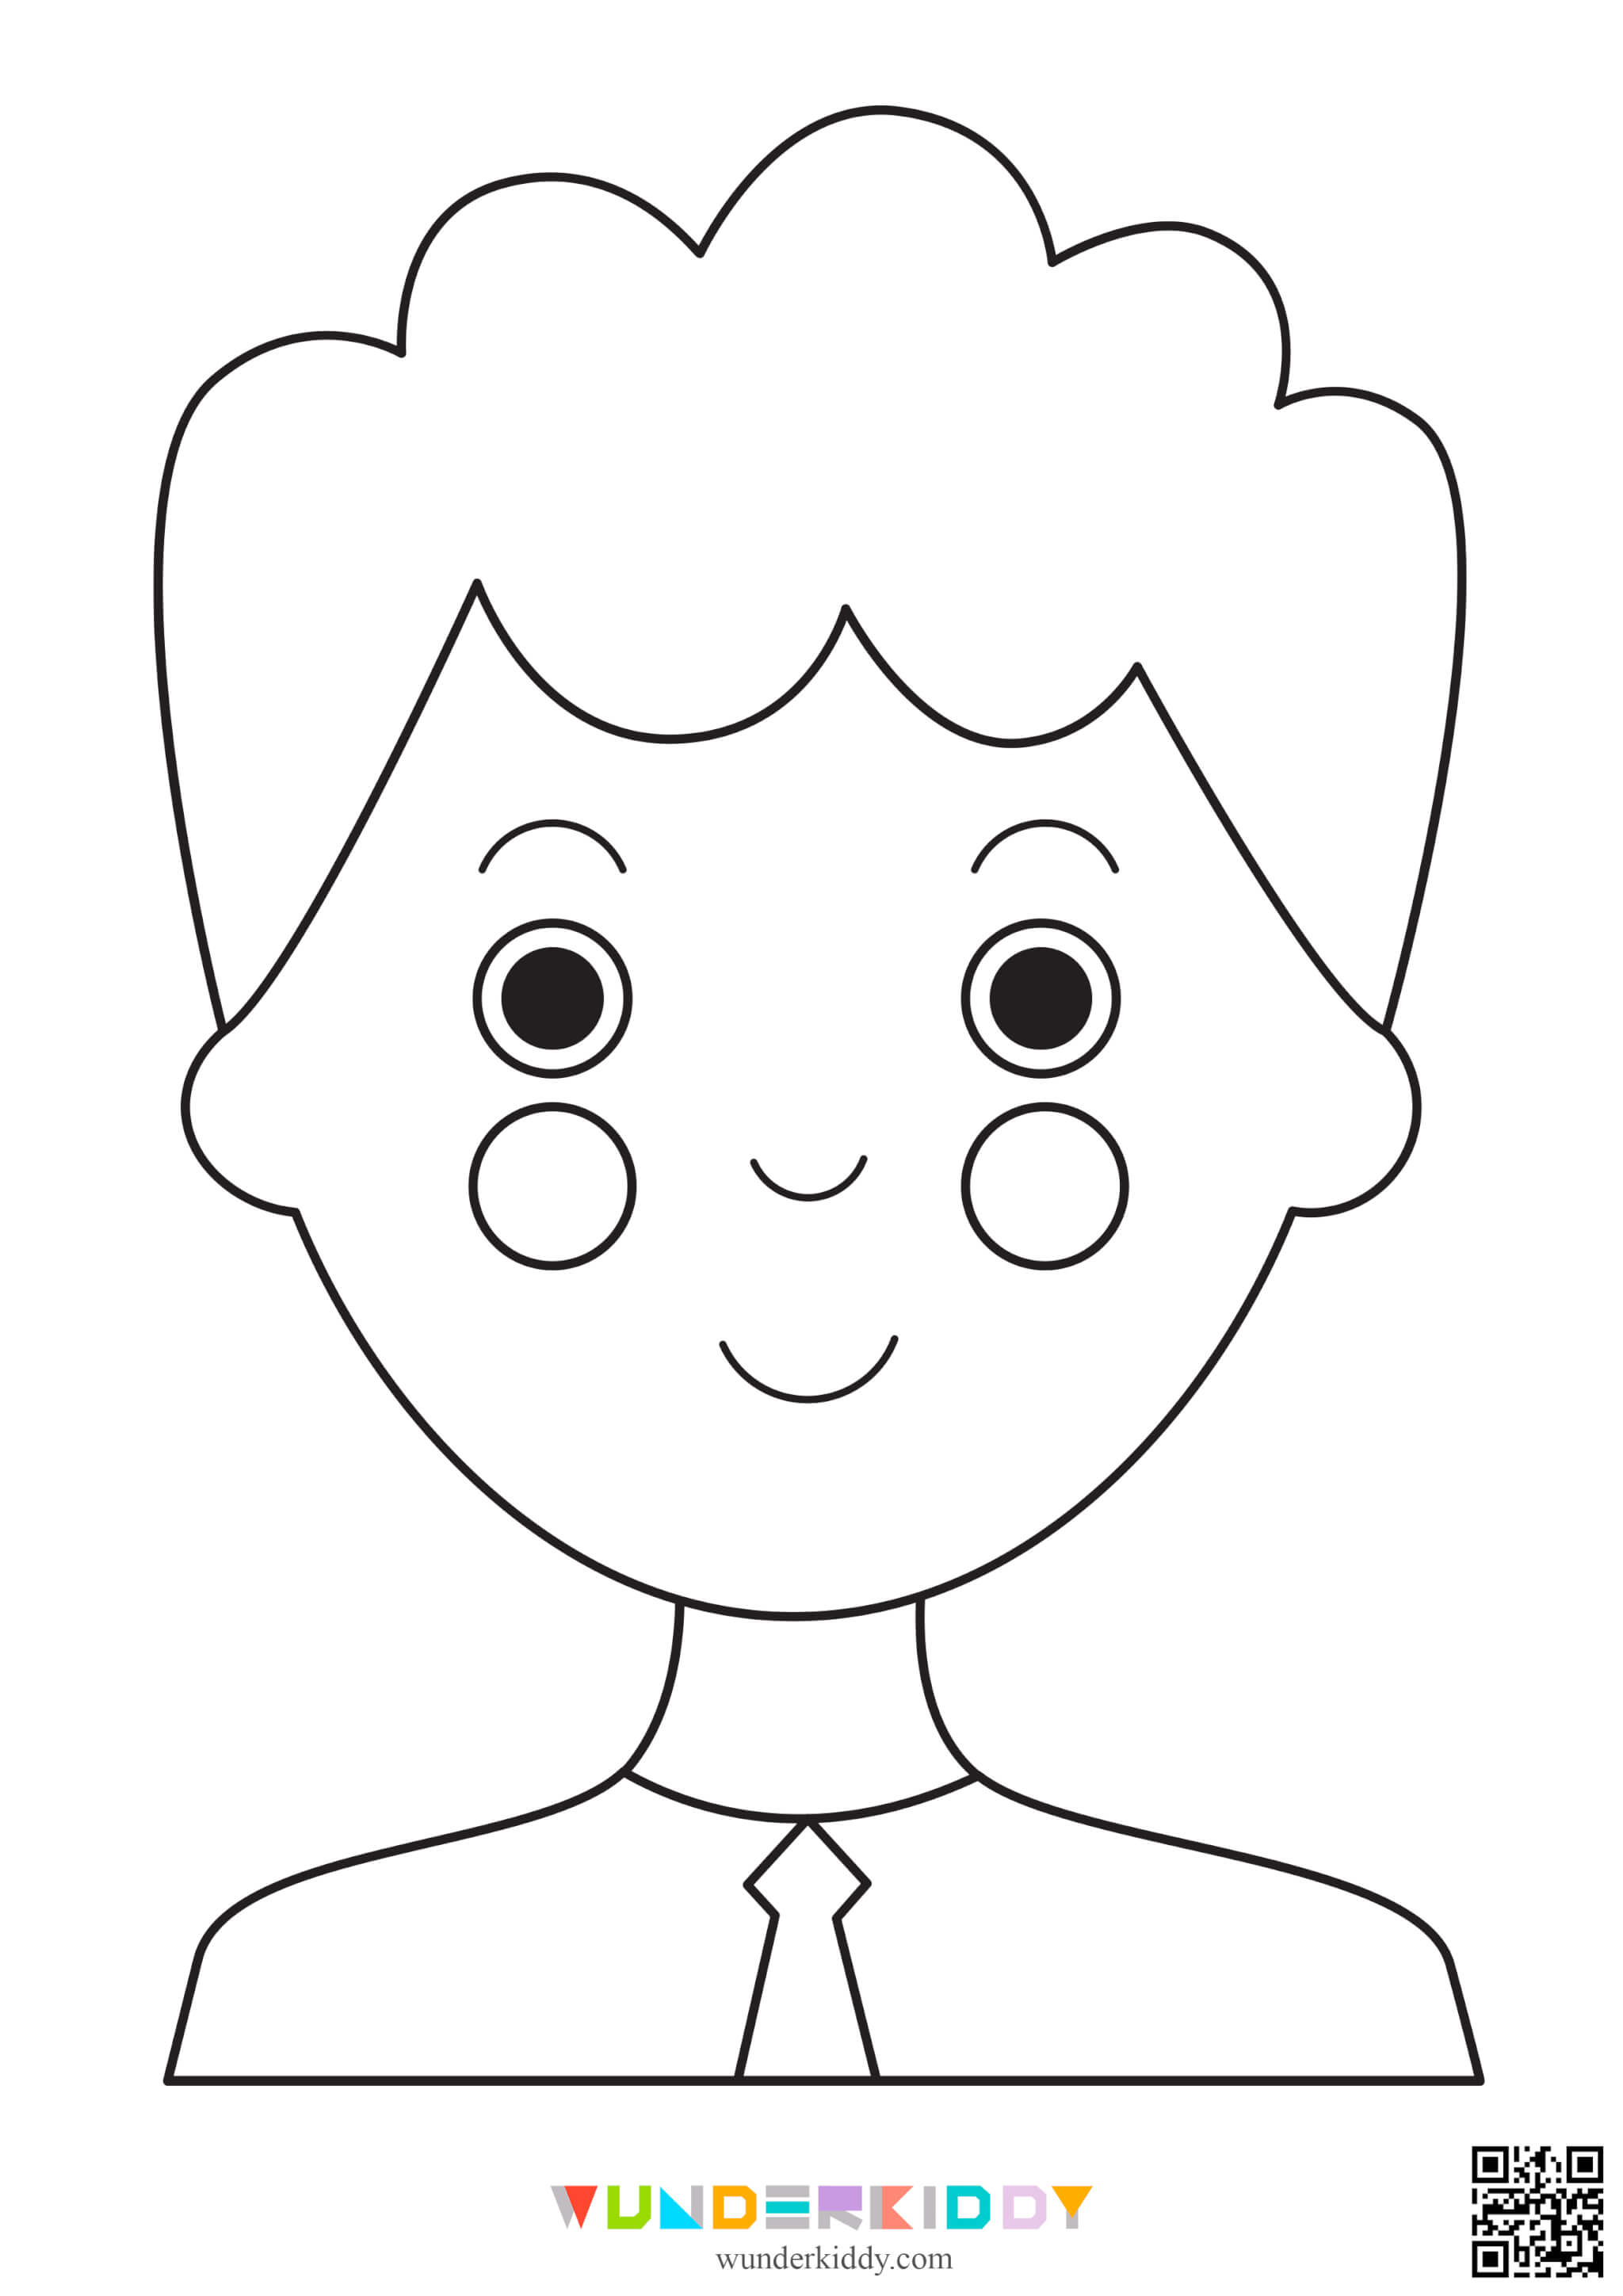 Face Coloring Page - Image 9